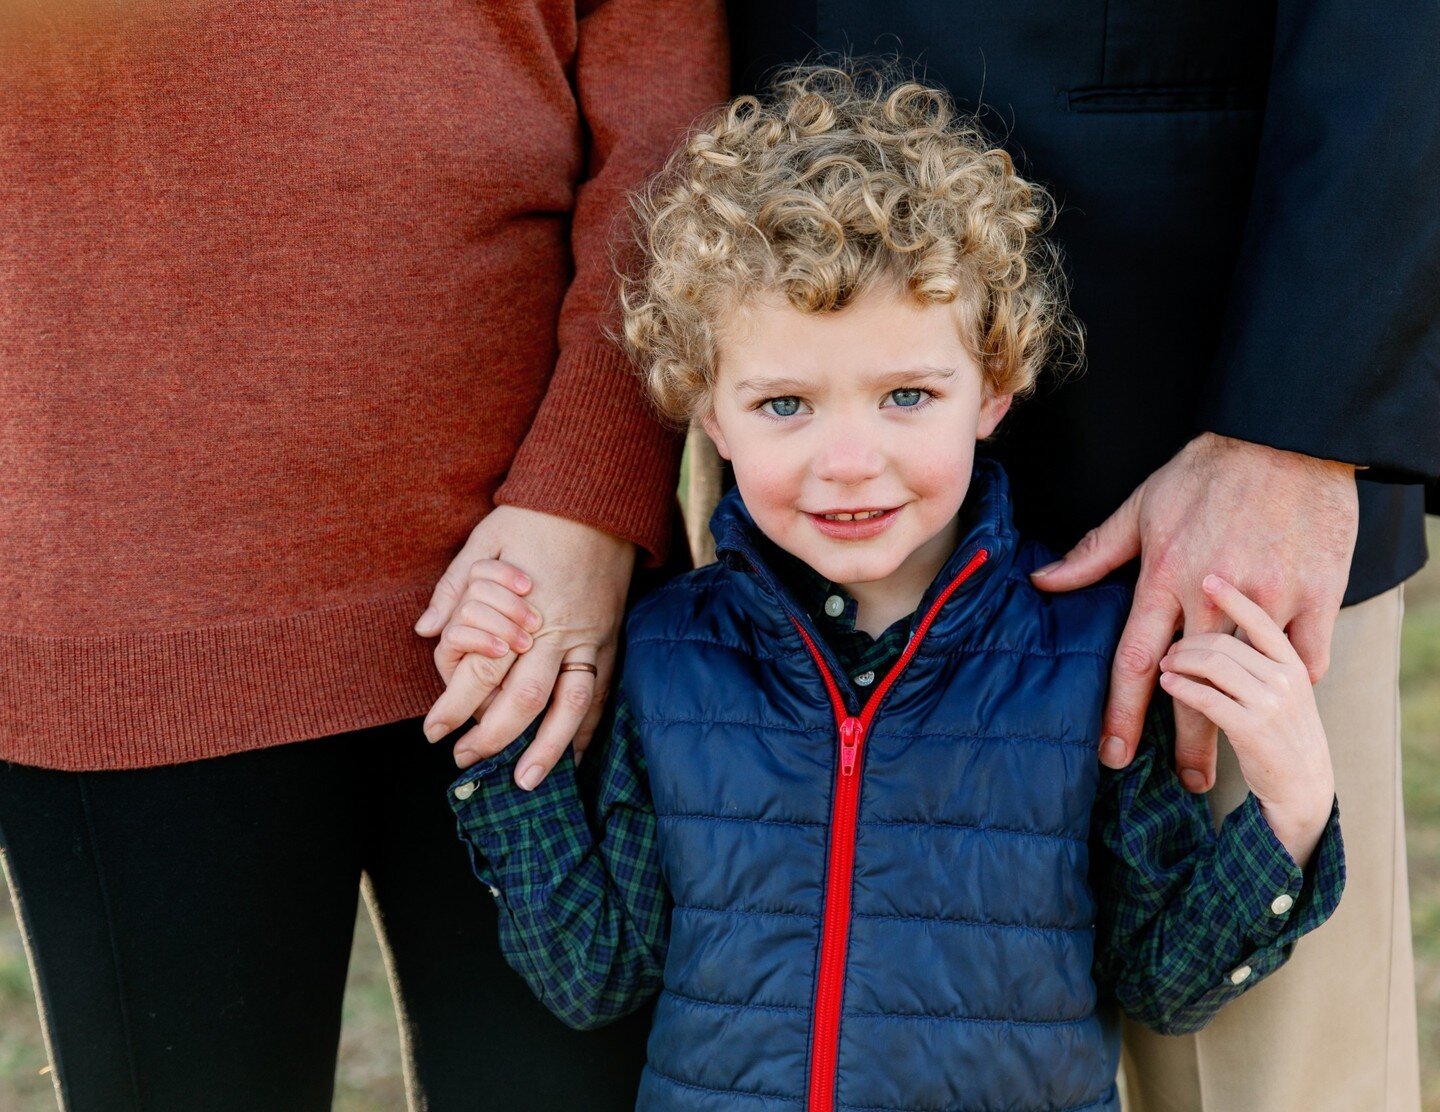 Pro Tip: For kids who start off shy at photo sessions, this is a great way to keep parents close and get a solo shot of cute faces close up. Eventually, he warmed up to me... can you even handle those curls?!?! Too precious!⁠
.⁠
.⁠
.⁠
#familysessions